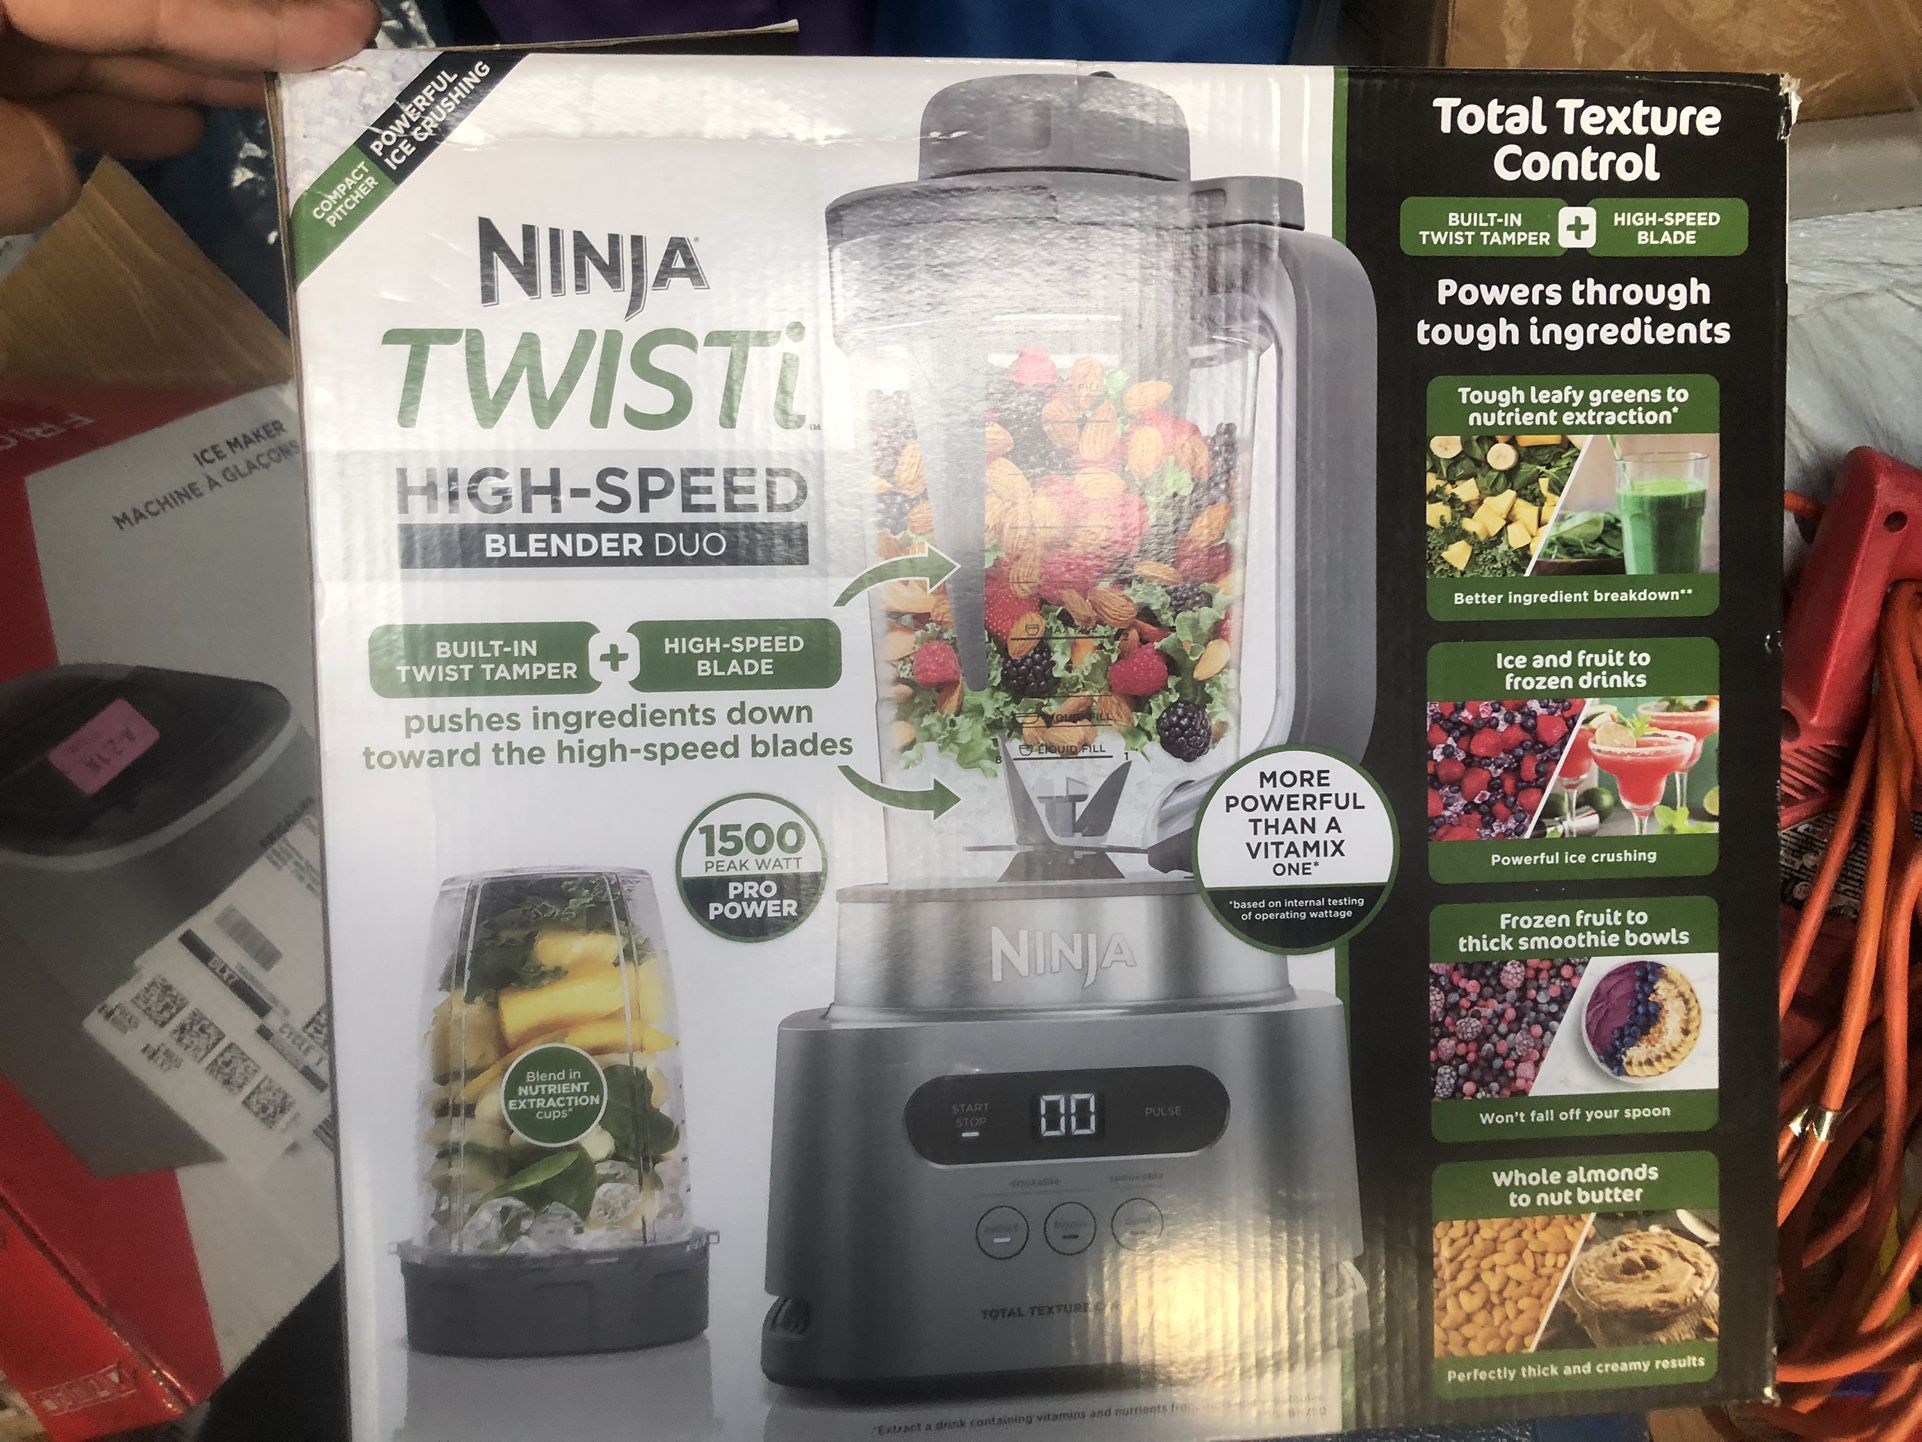 ninja twisti high speed blender duo for Sale in Alta Loma, CA - OfferUp